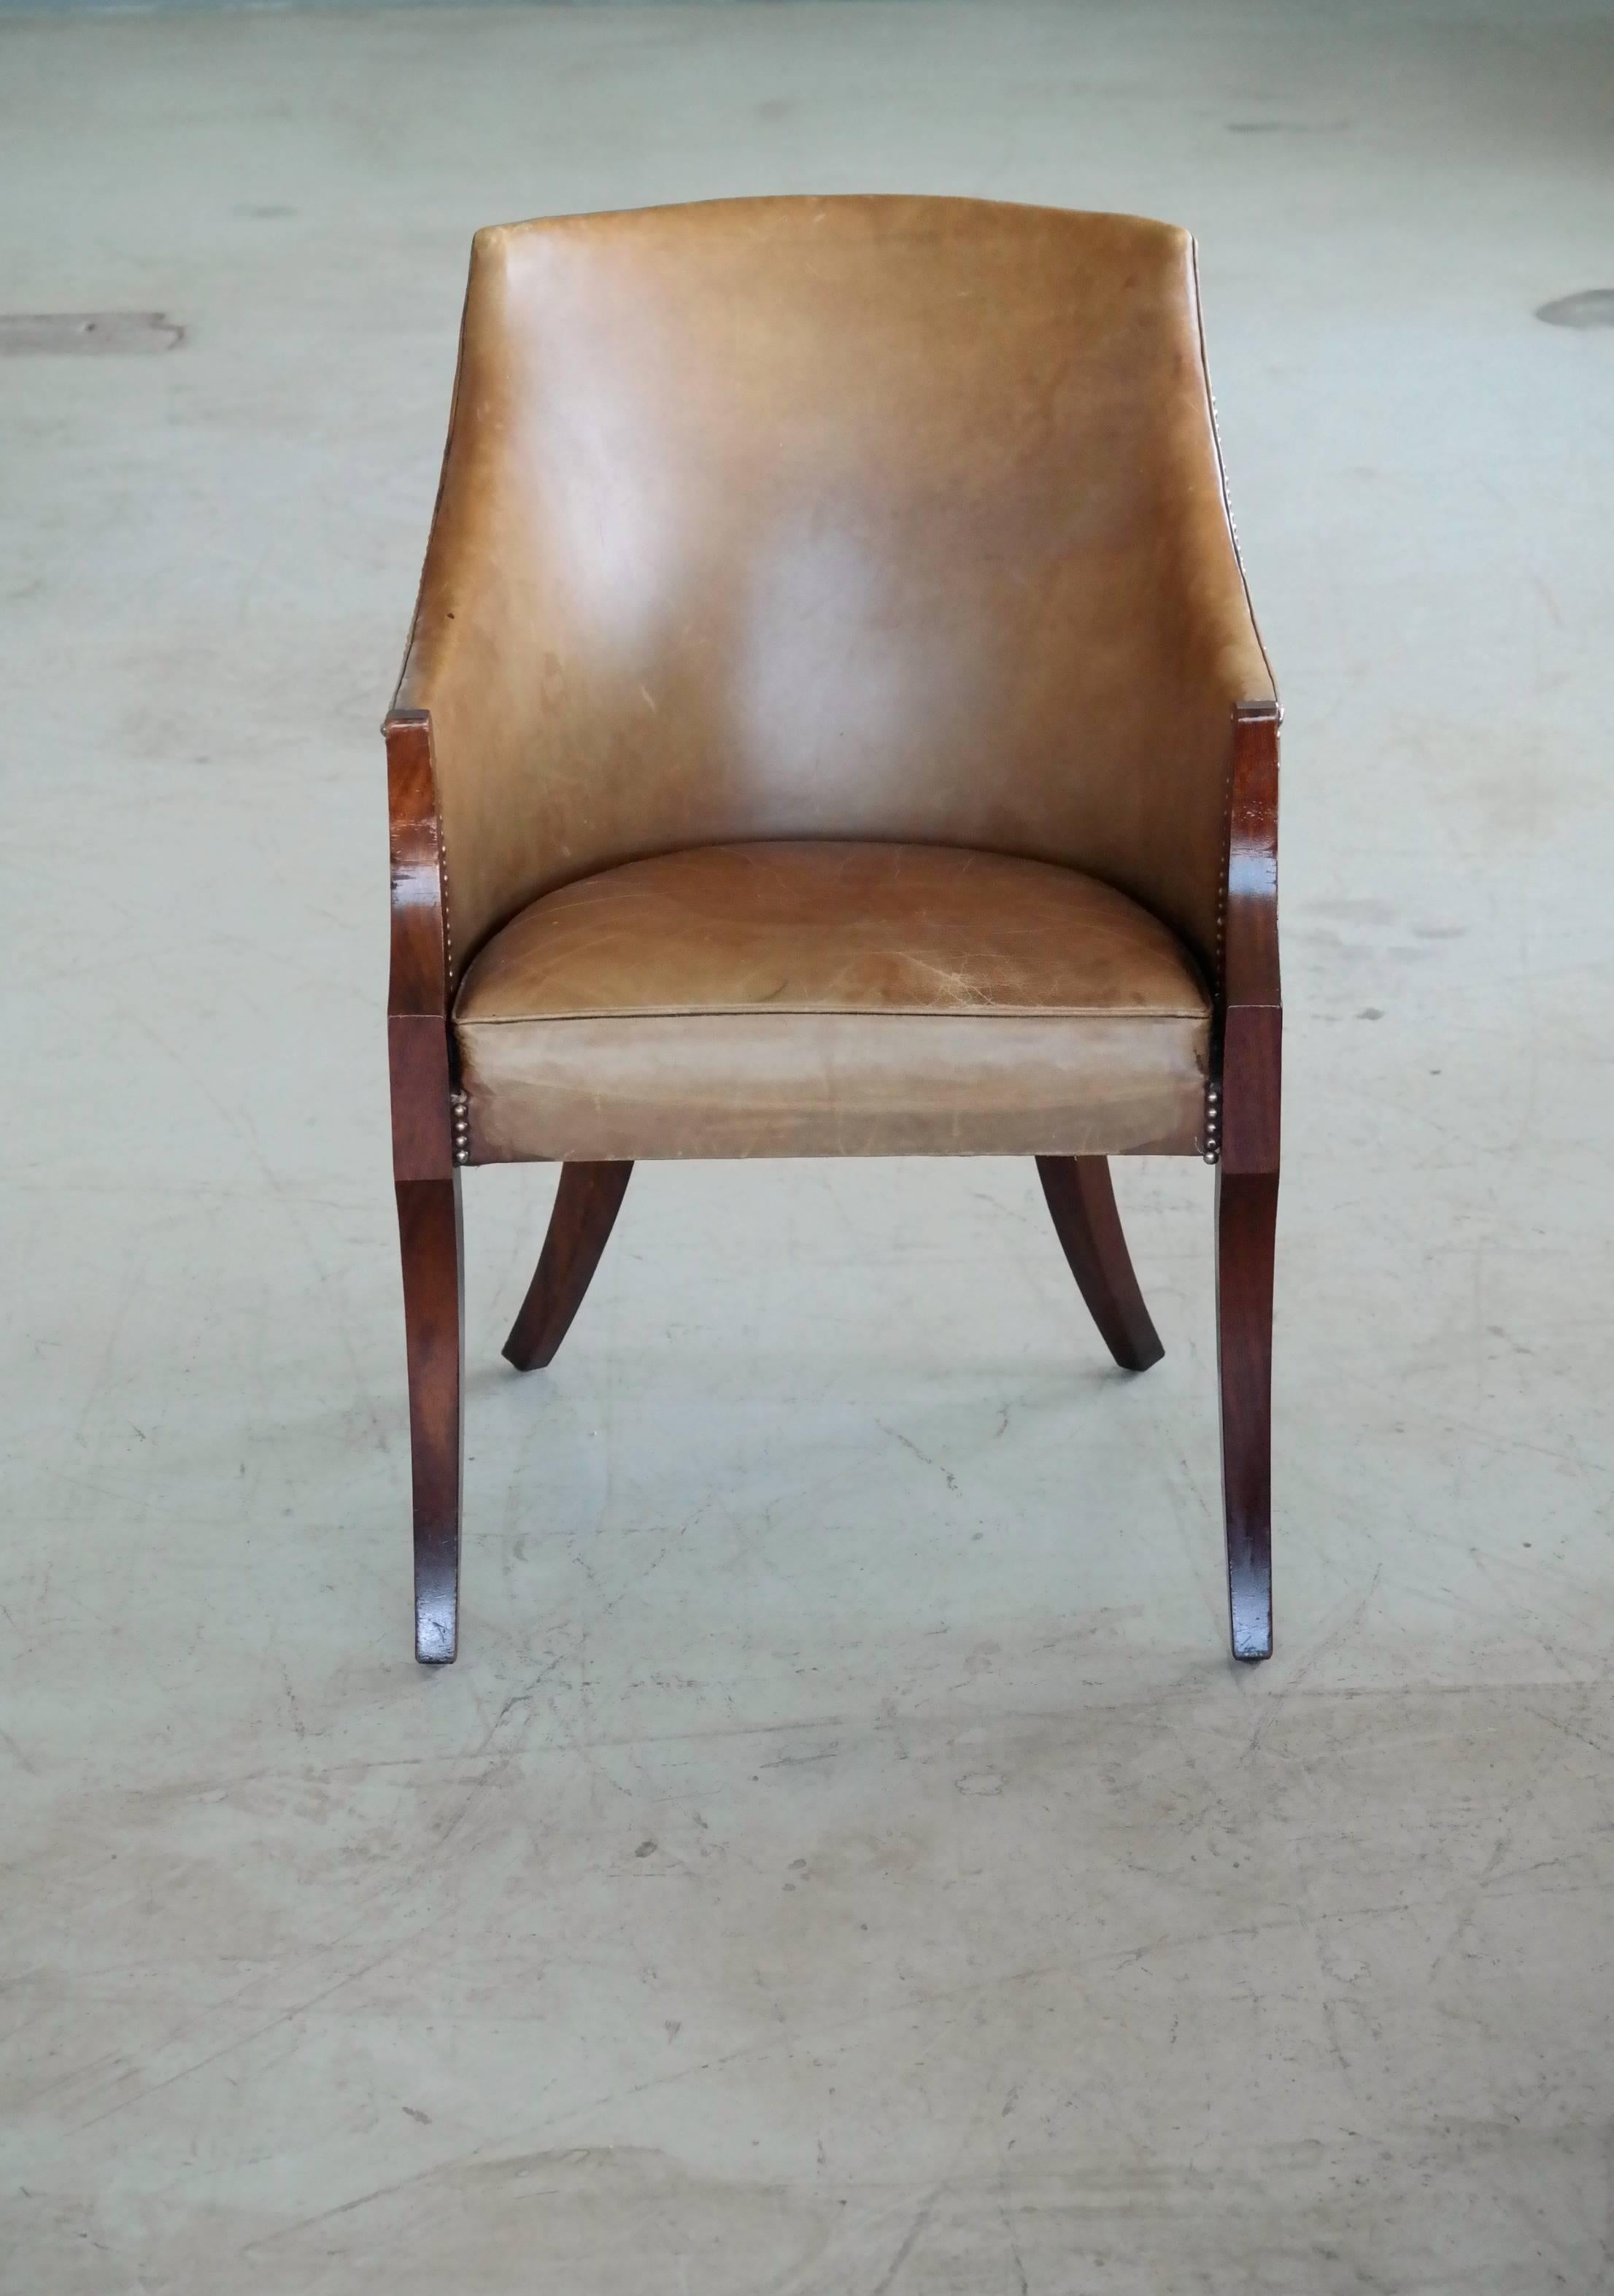 Scandinavian Modern Mahogany and Leather Side or Easy Chair by Frits Henningsen Danish Midcentury